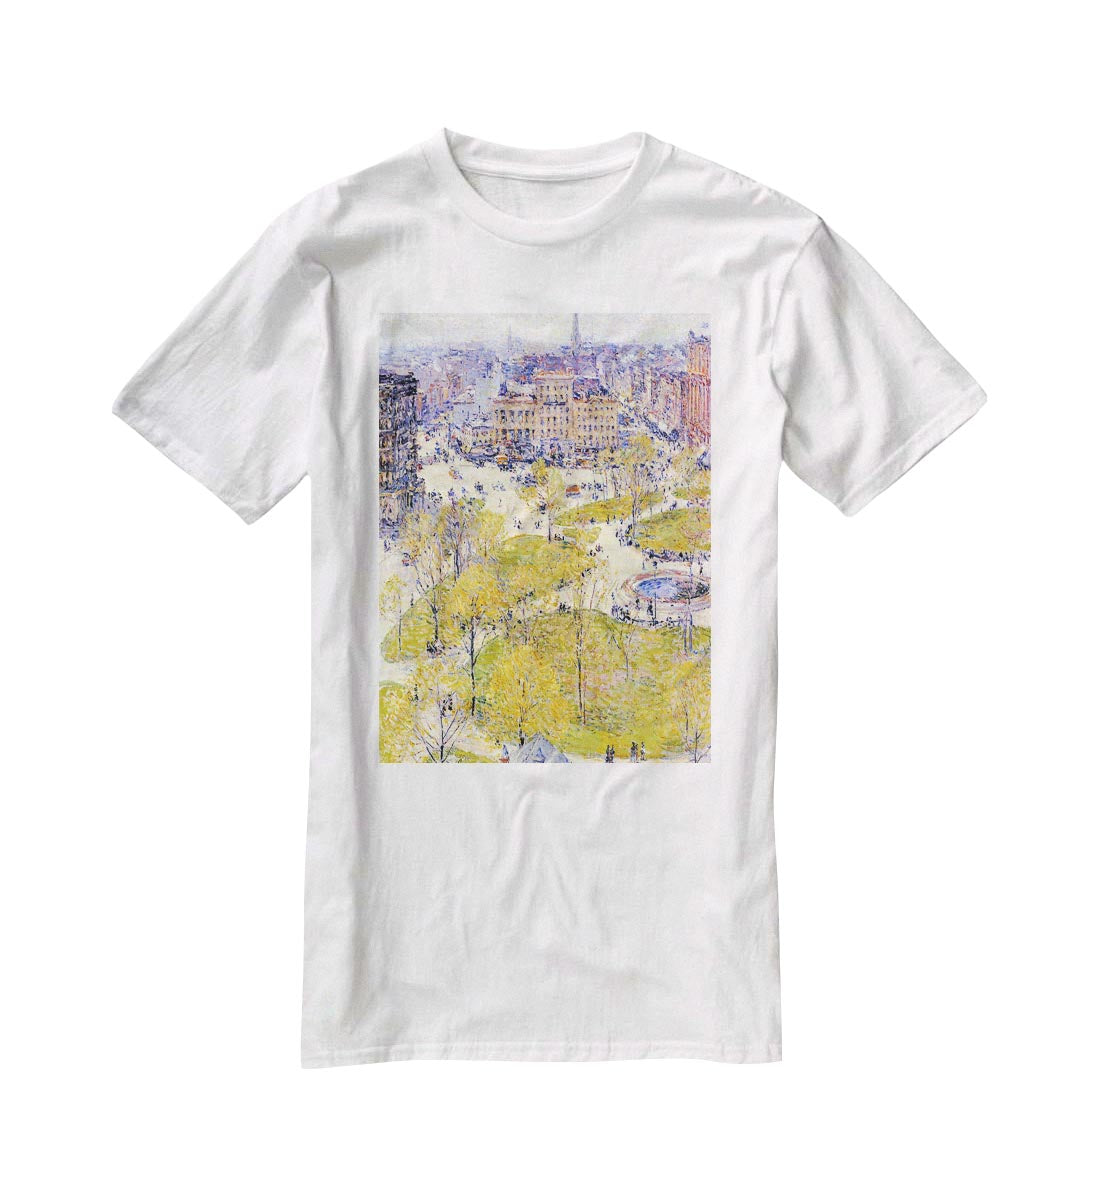 Union Square in Spring by Hassam T-Shirt - Canvas Art Rocks - 5